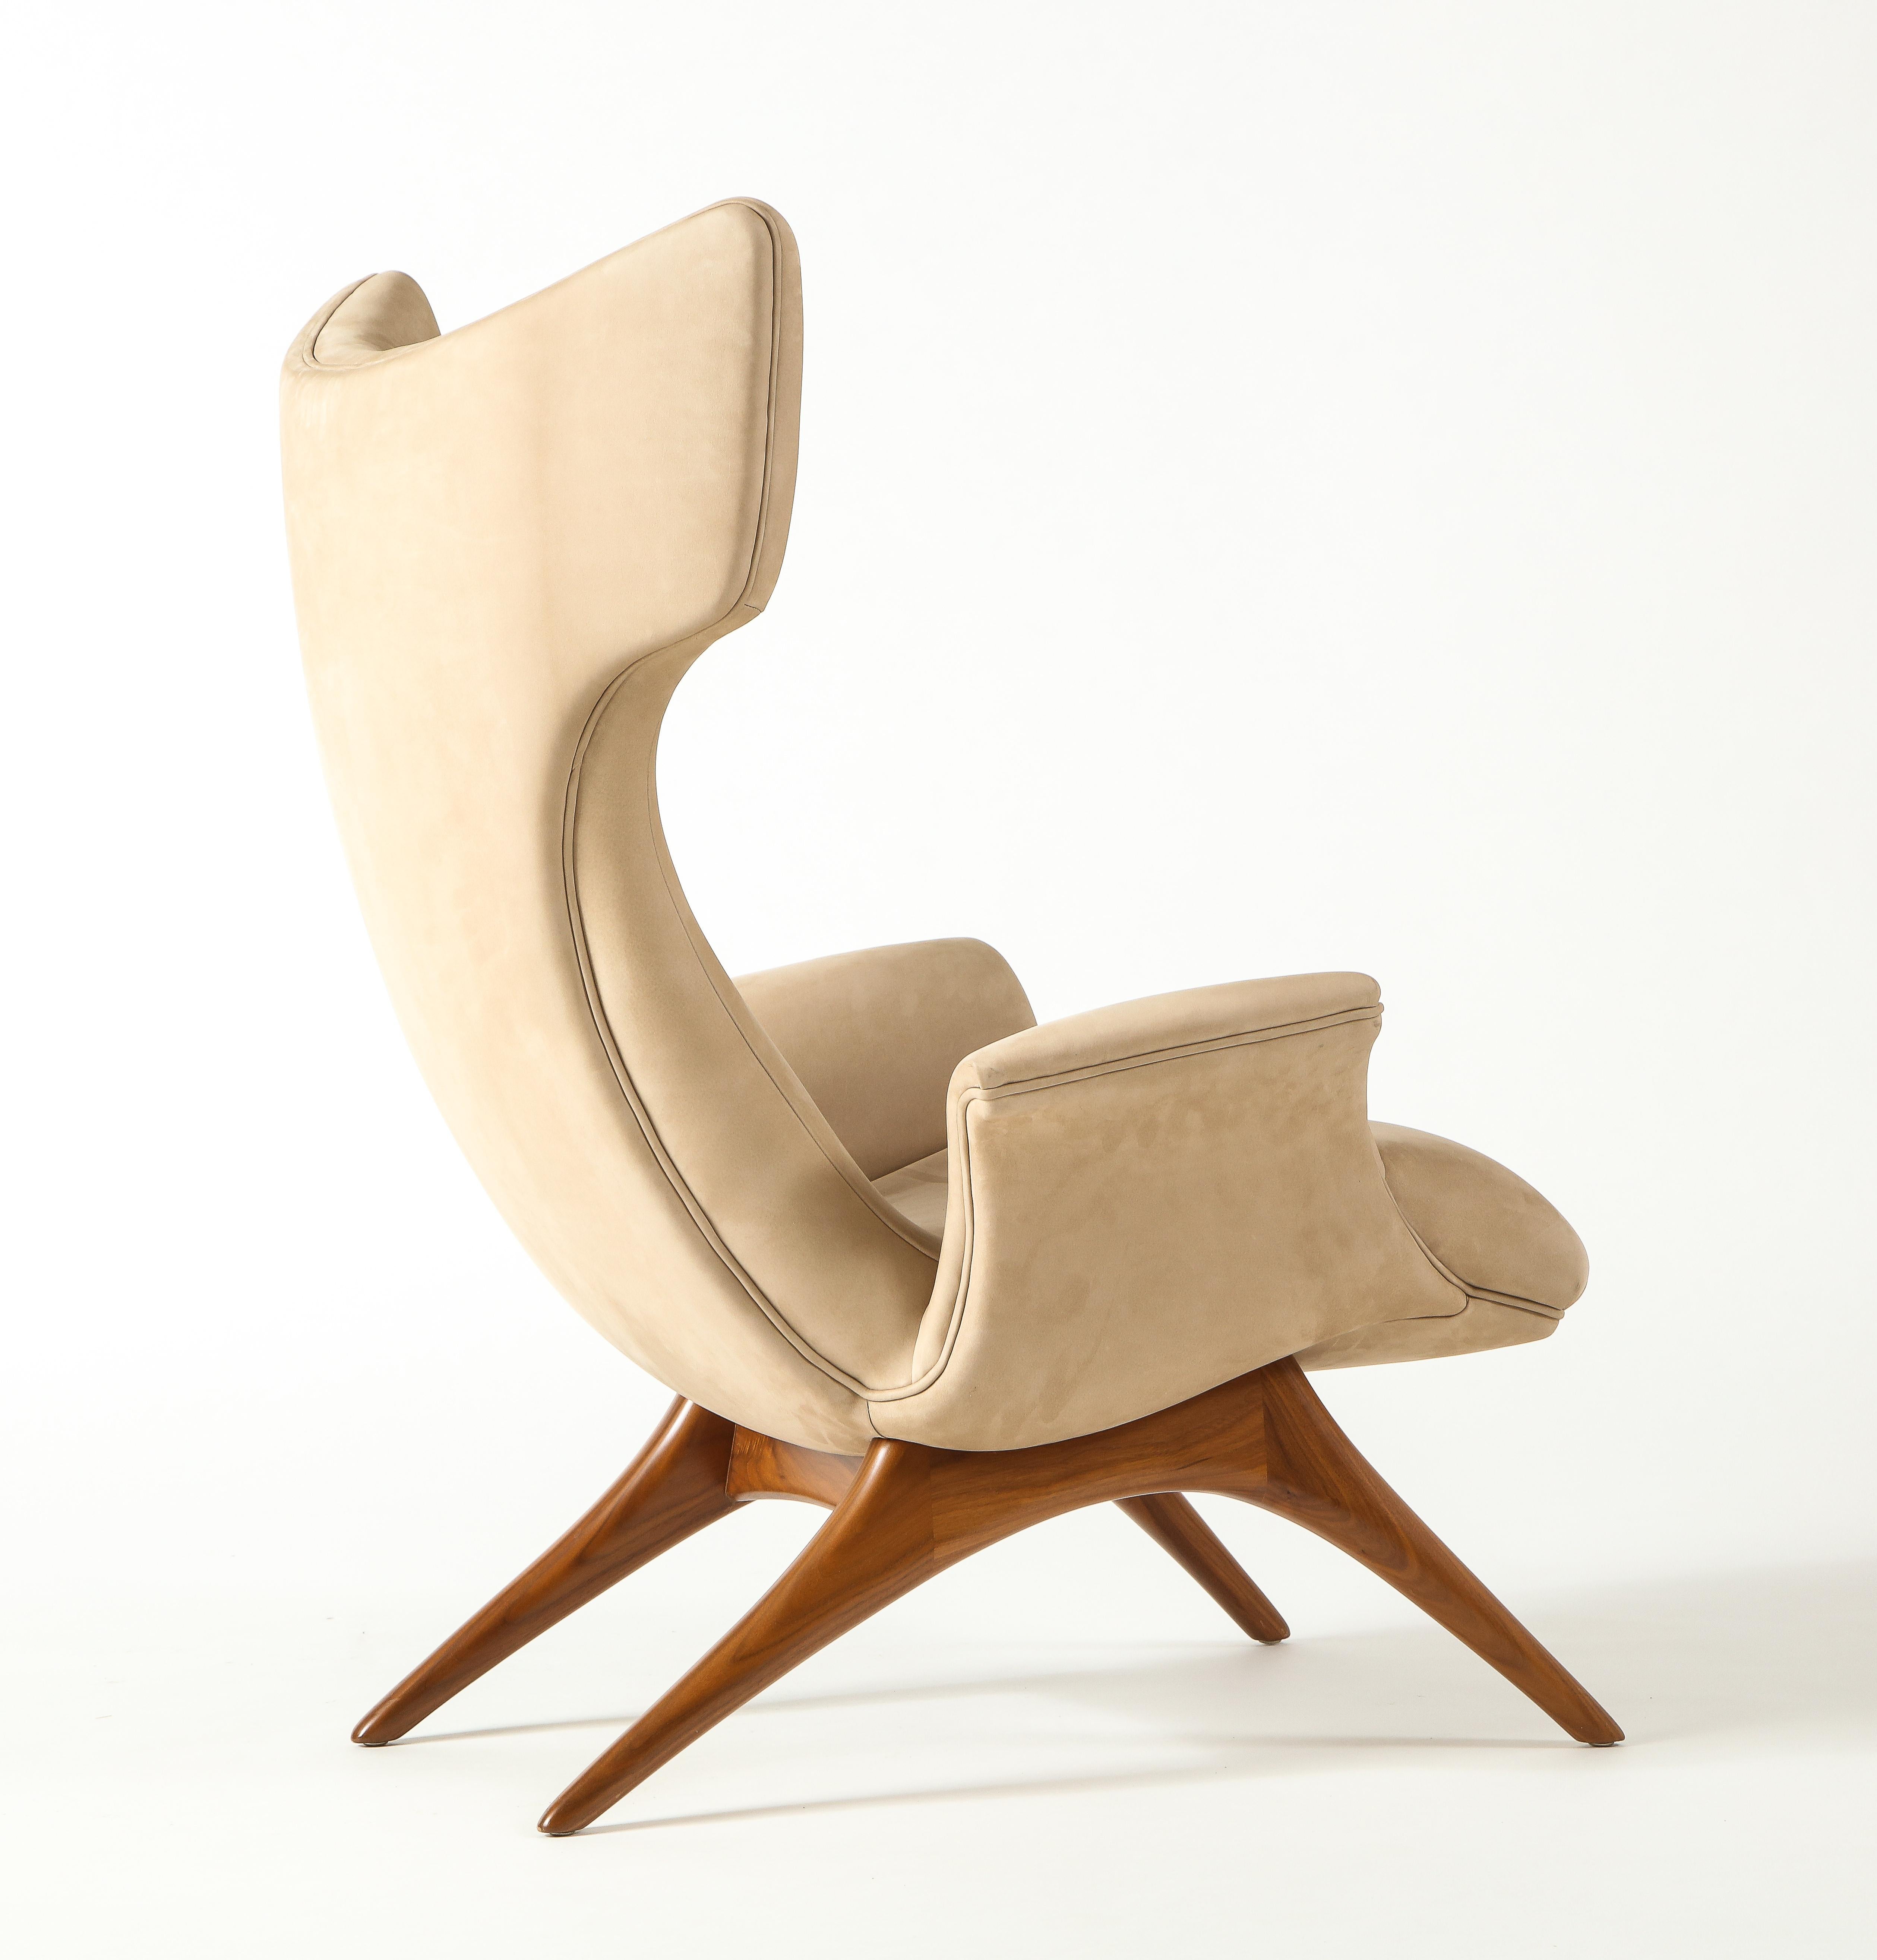 Vladimir Kagan Ondine Chair with Sueded Leather Upholstery & Natural Walnut Base 5